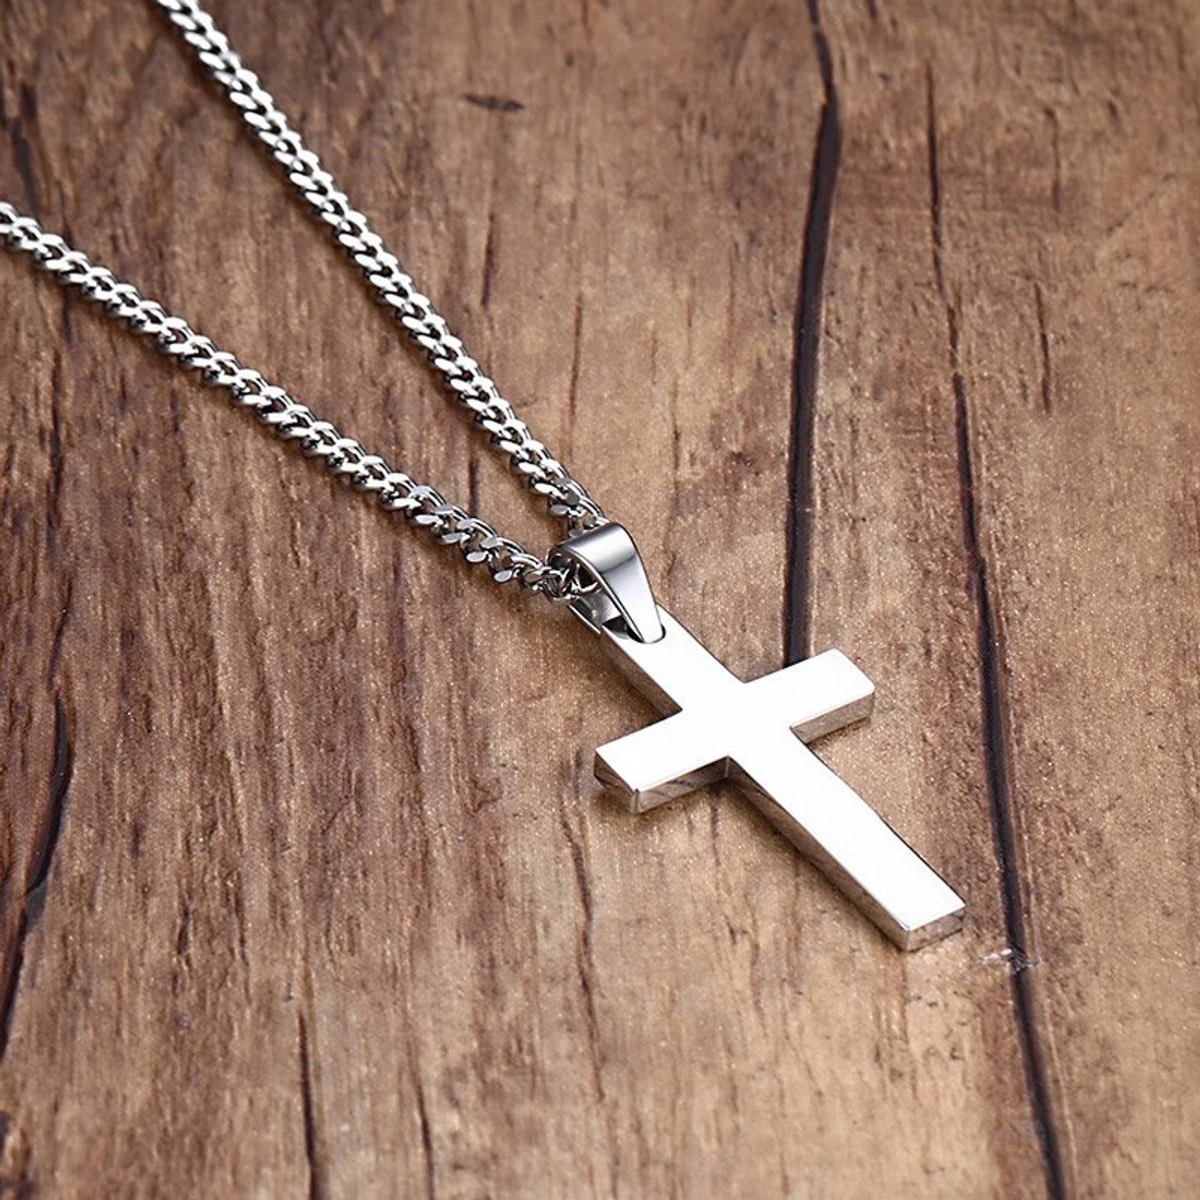 Cross New Stylish Steel Necklace For Men